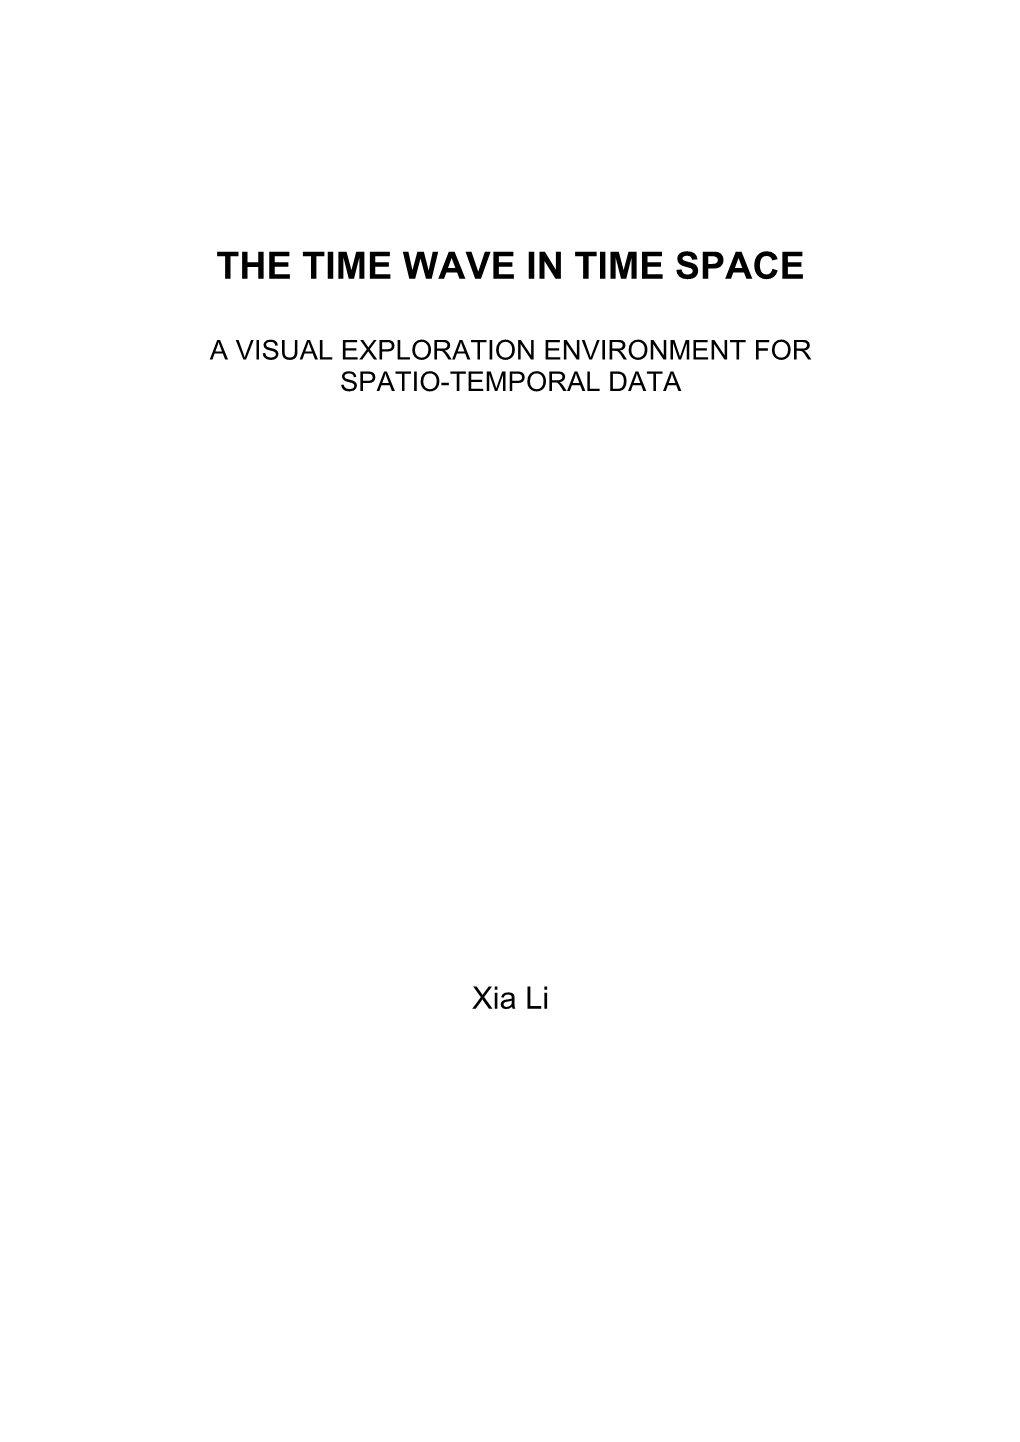 The Time Wave in Time Space: a Visual Exploration Environment for Spatio